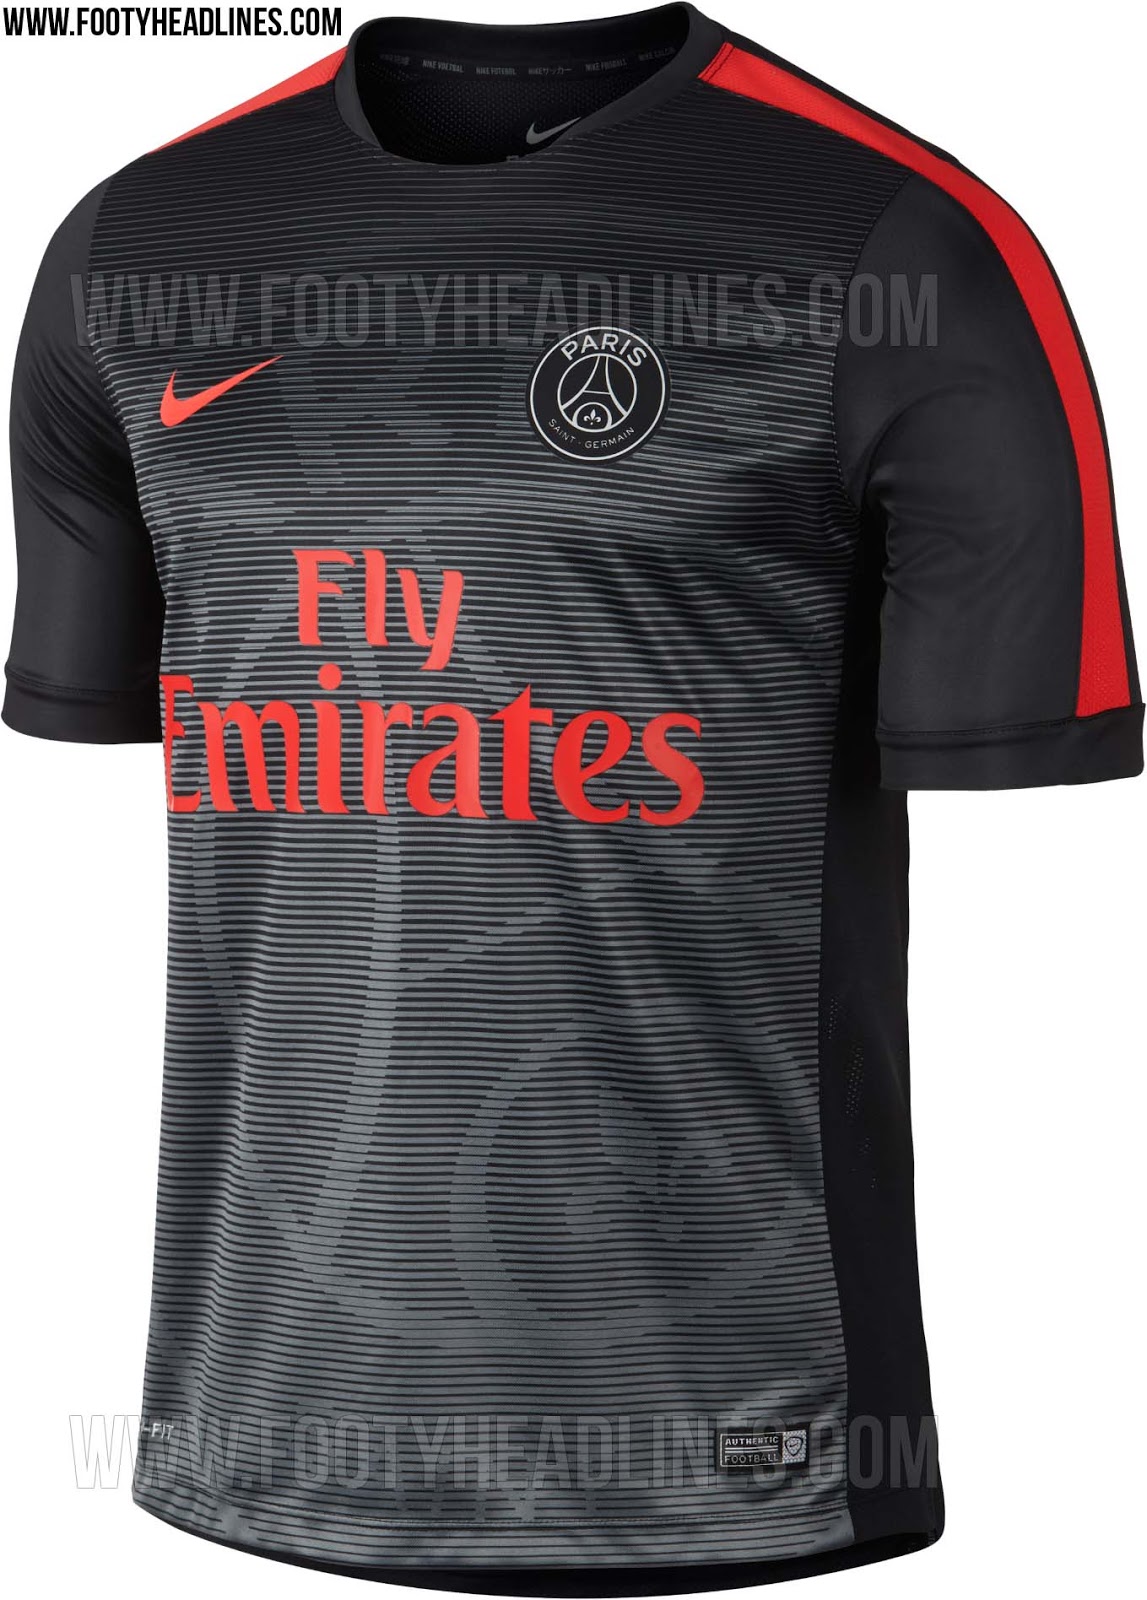 Paris Saint-Germain 2015 Pre-Match and Training Shirts Unveiled - Footy